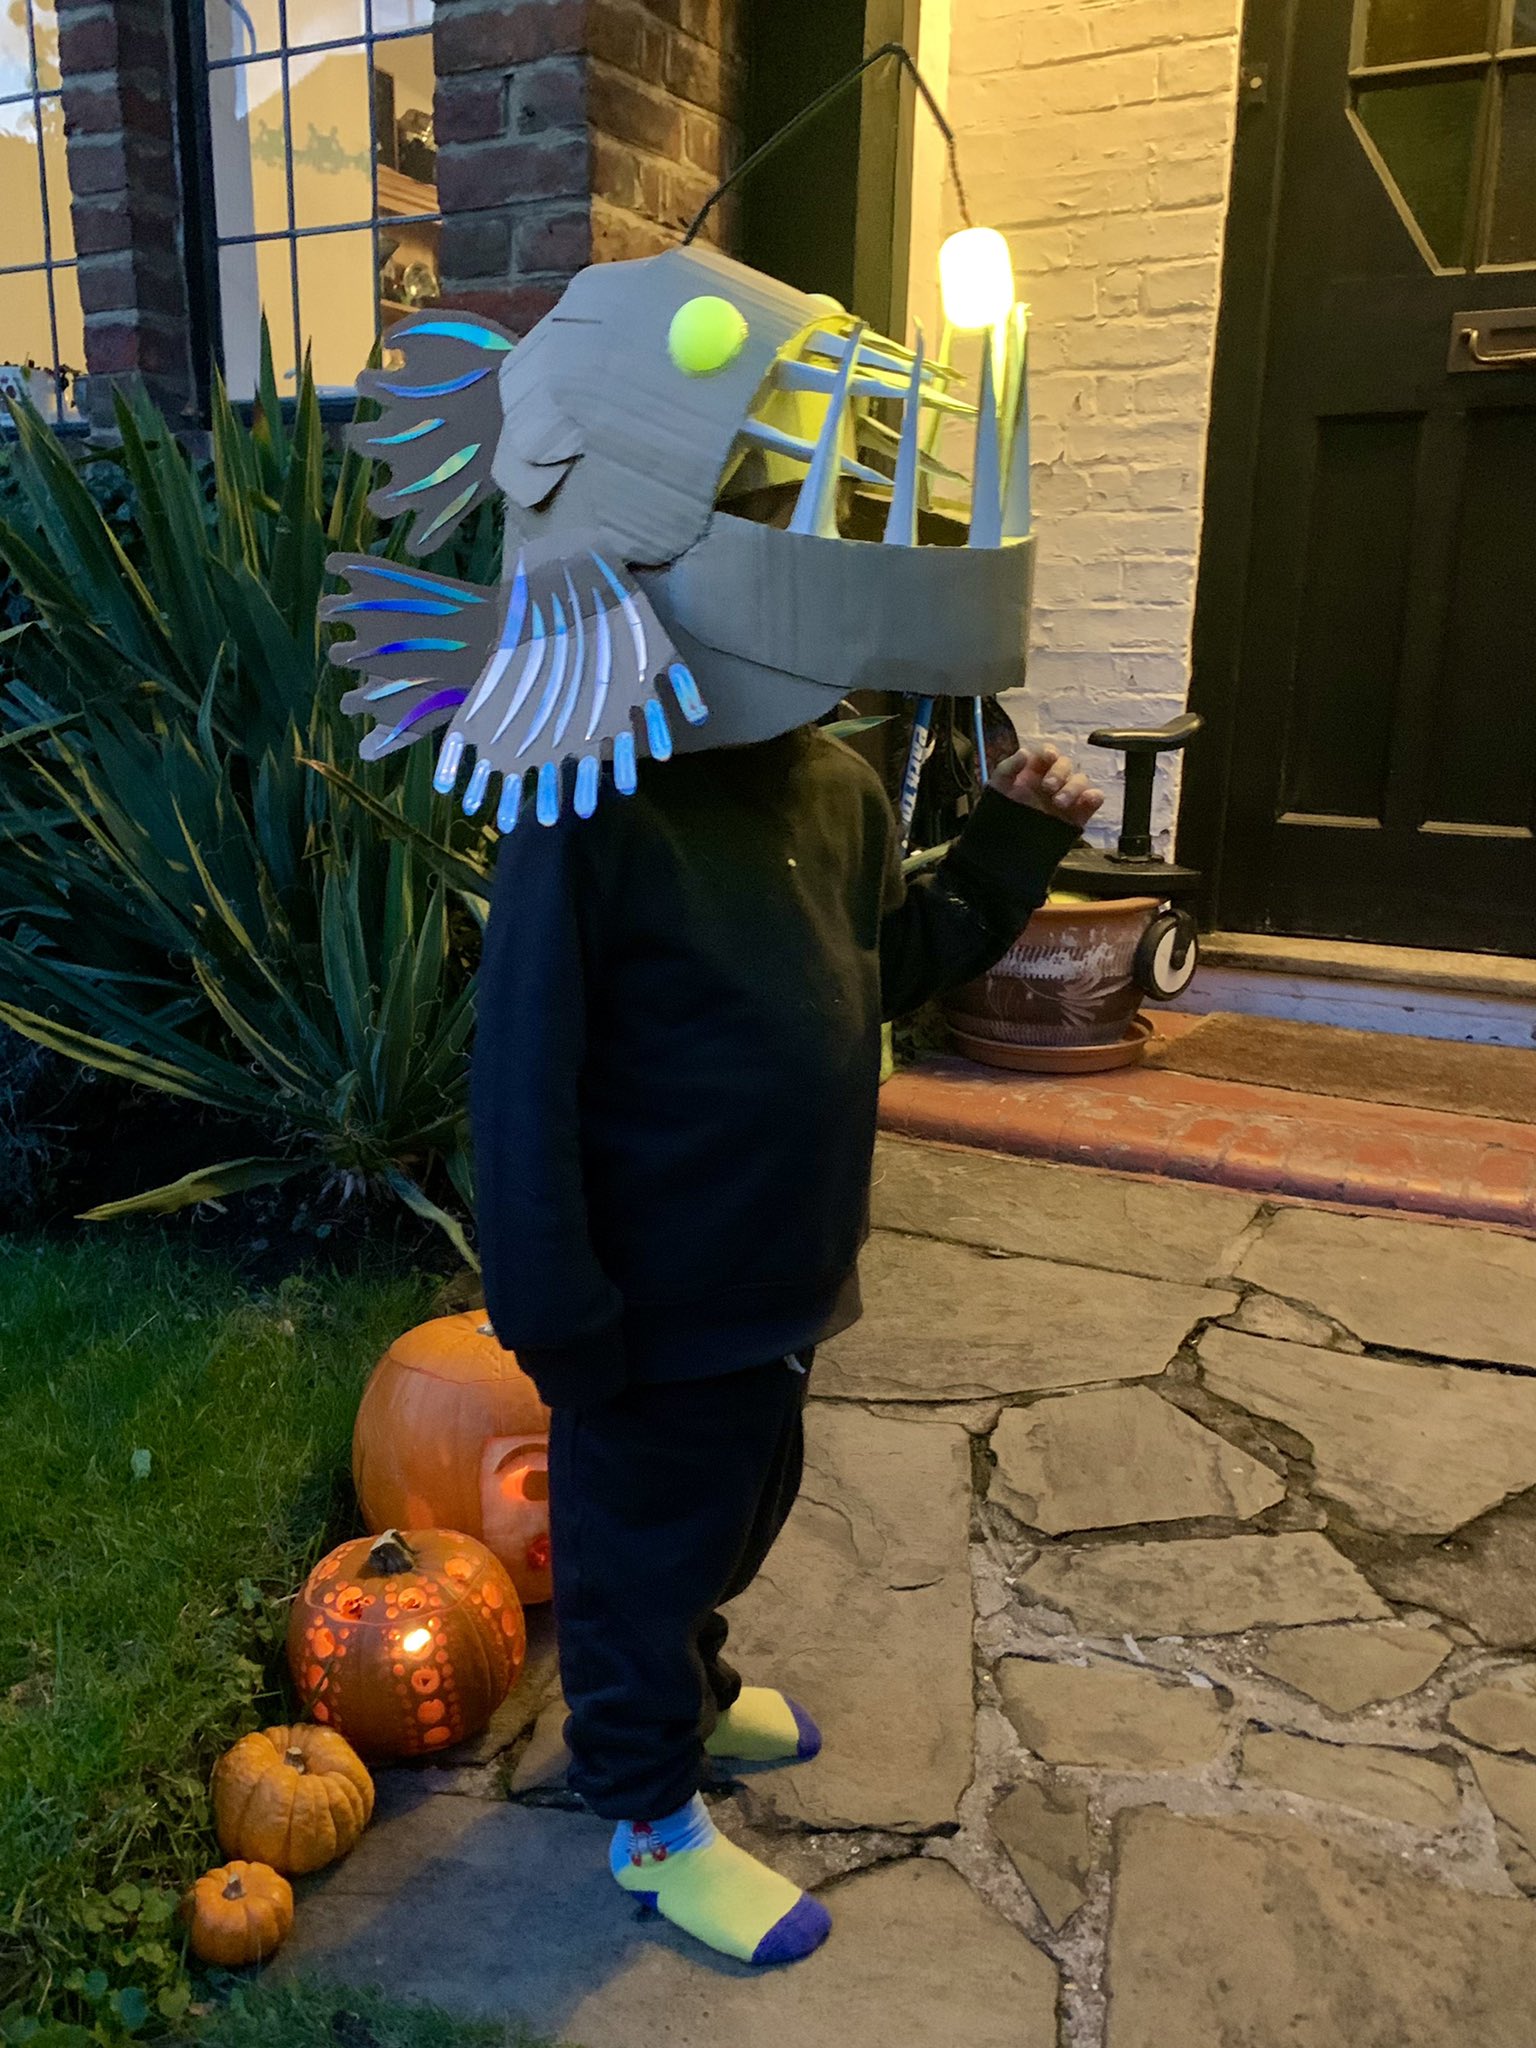 TheCraftyRobot on X: Our toddler wanted an angler fish costume